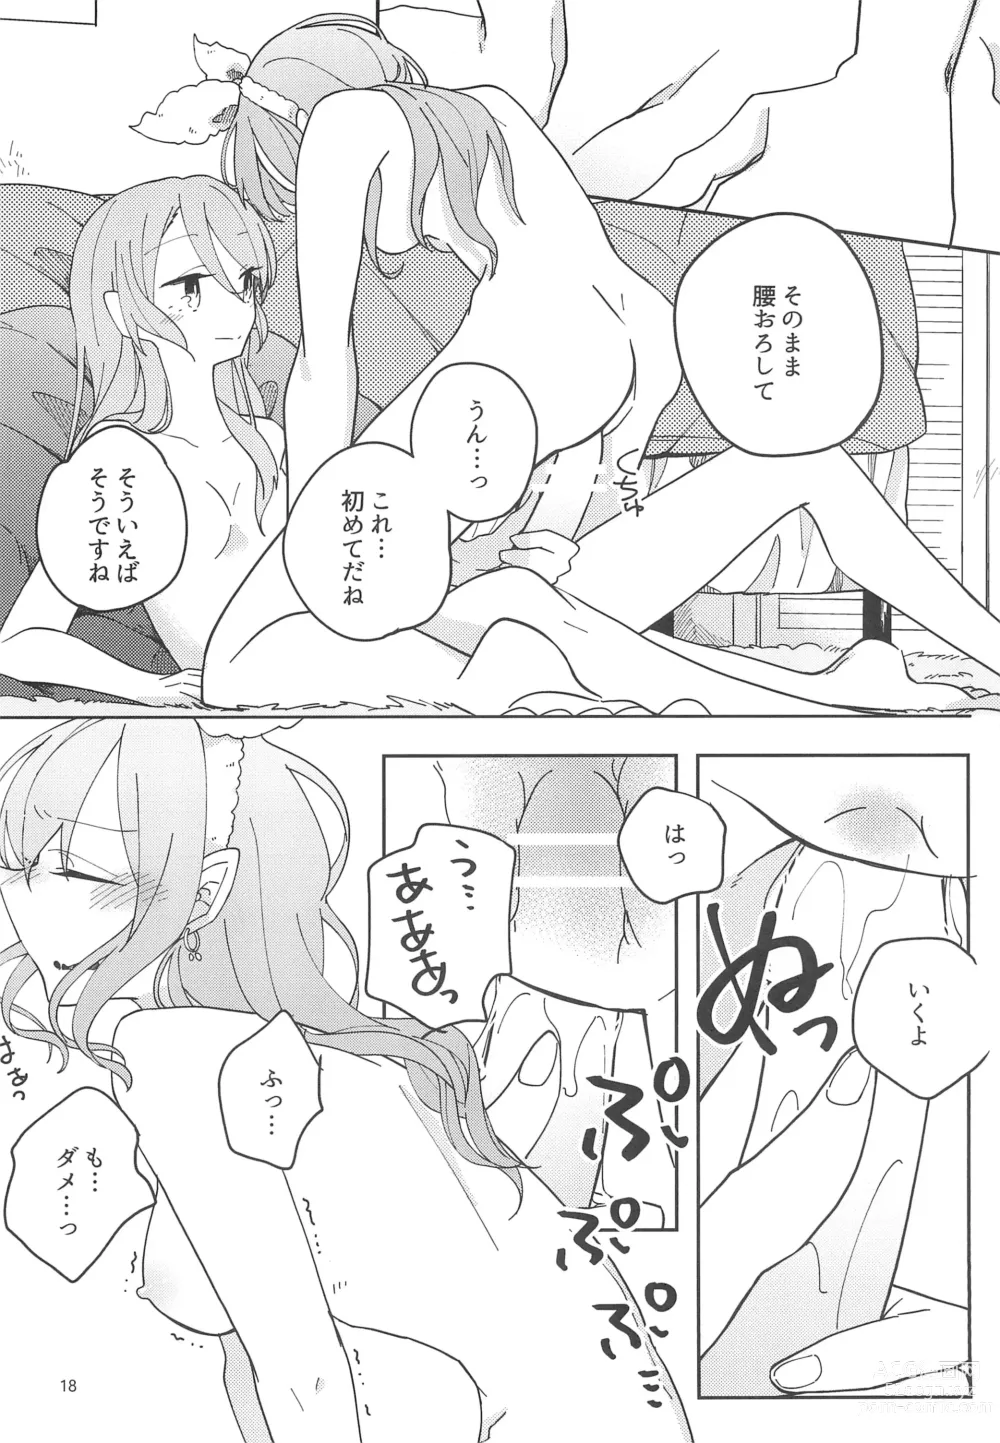 Page 20 of doujinshi I’m crazy about you.